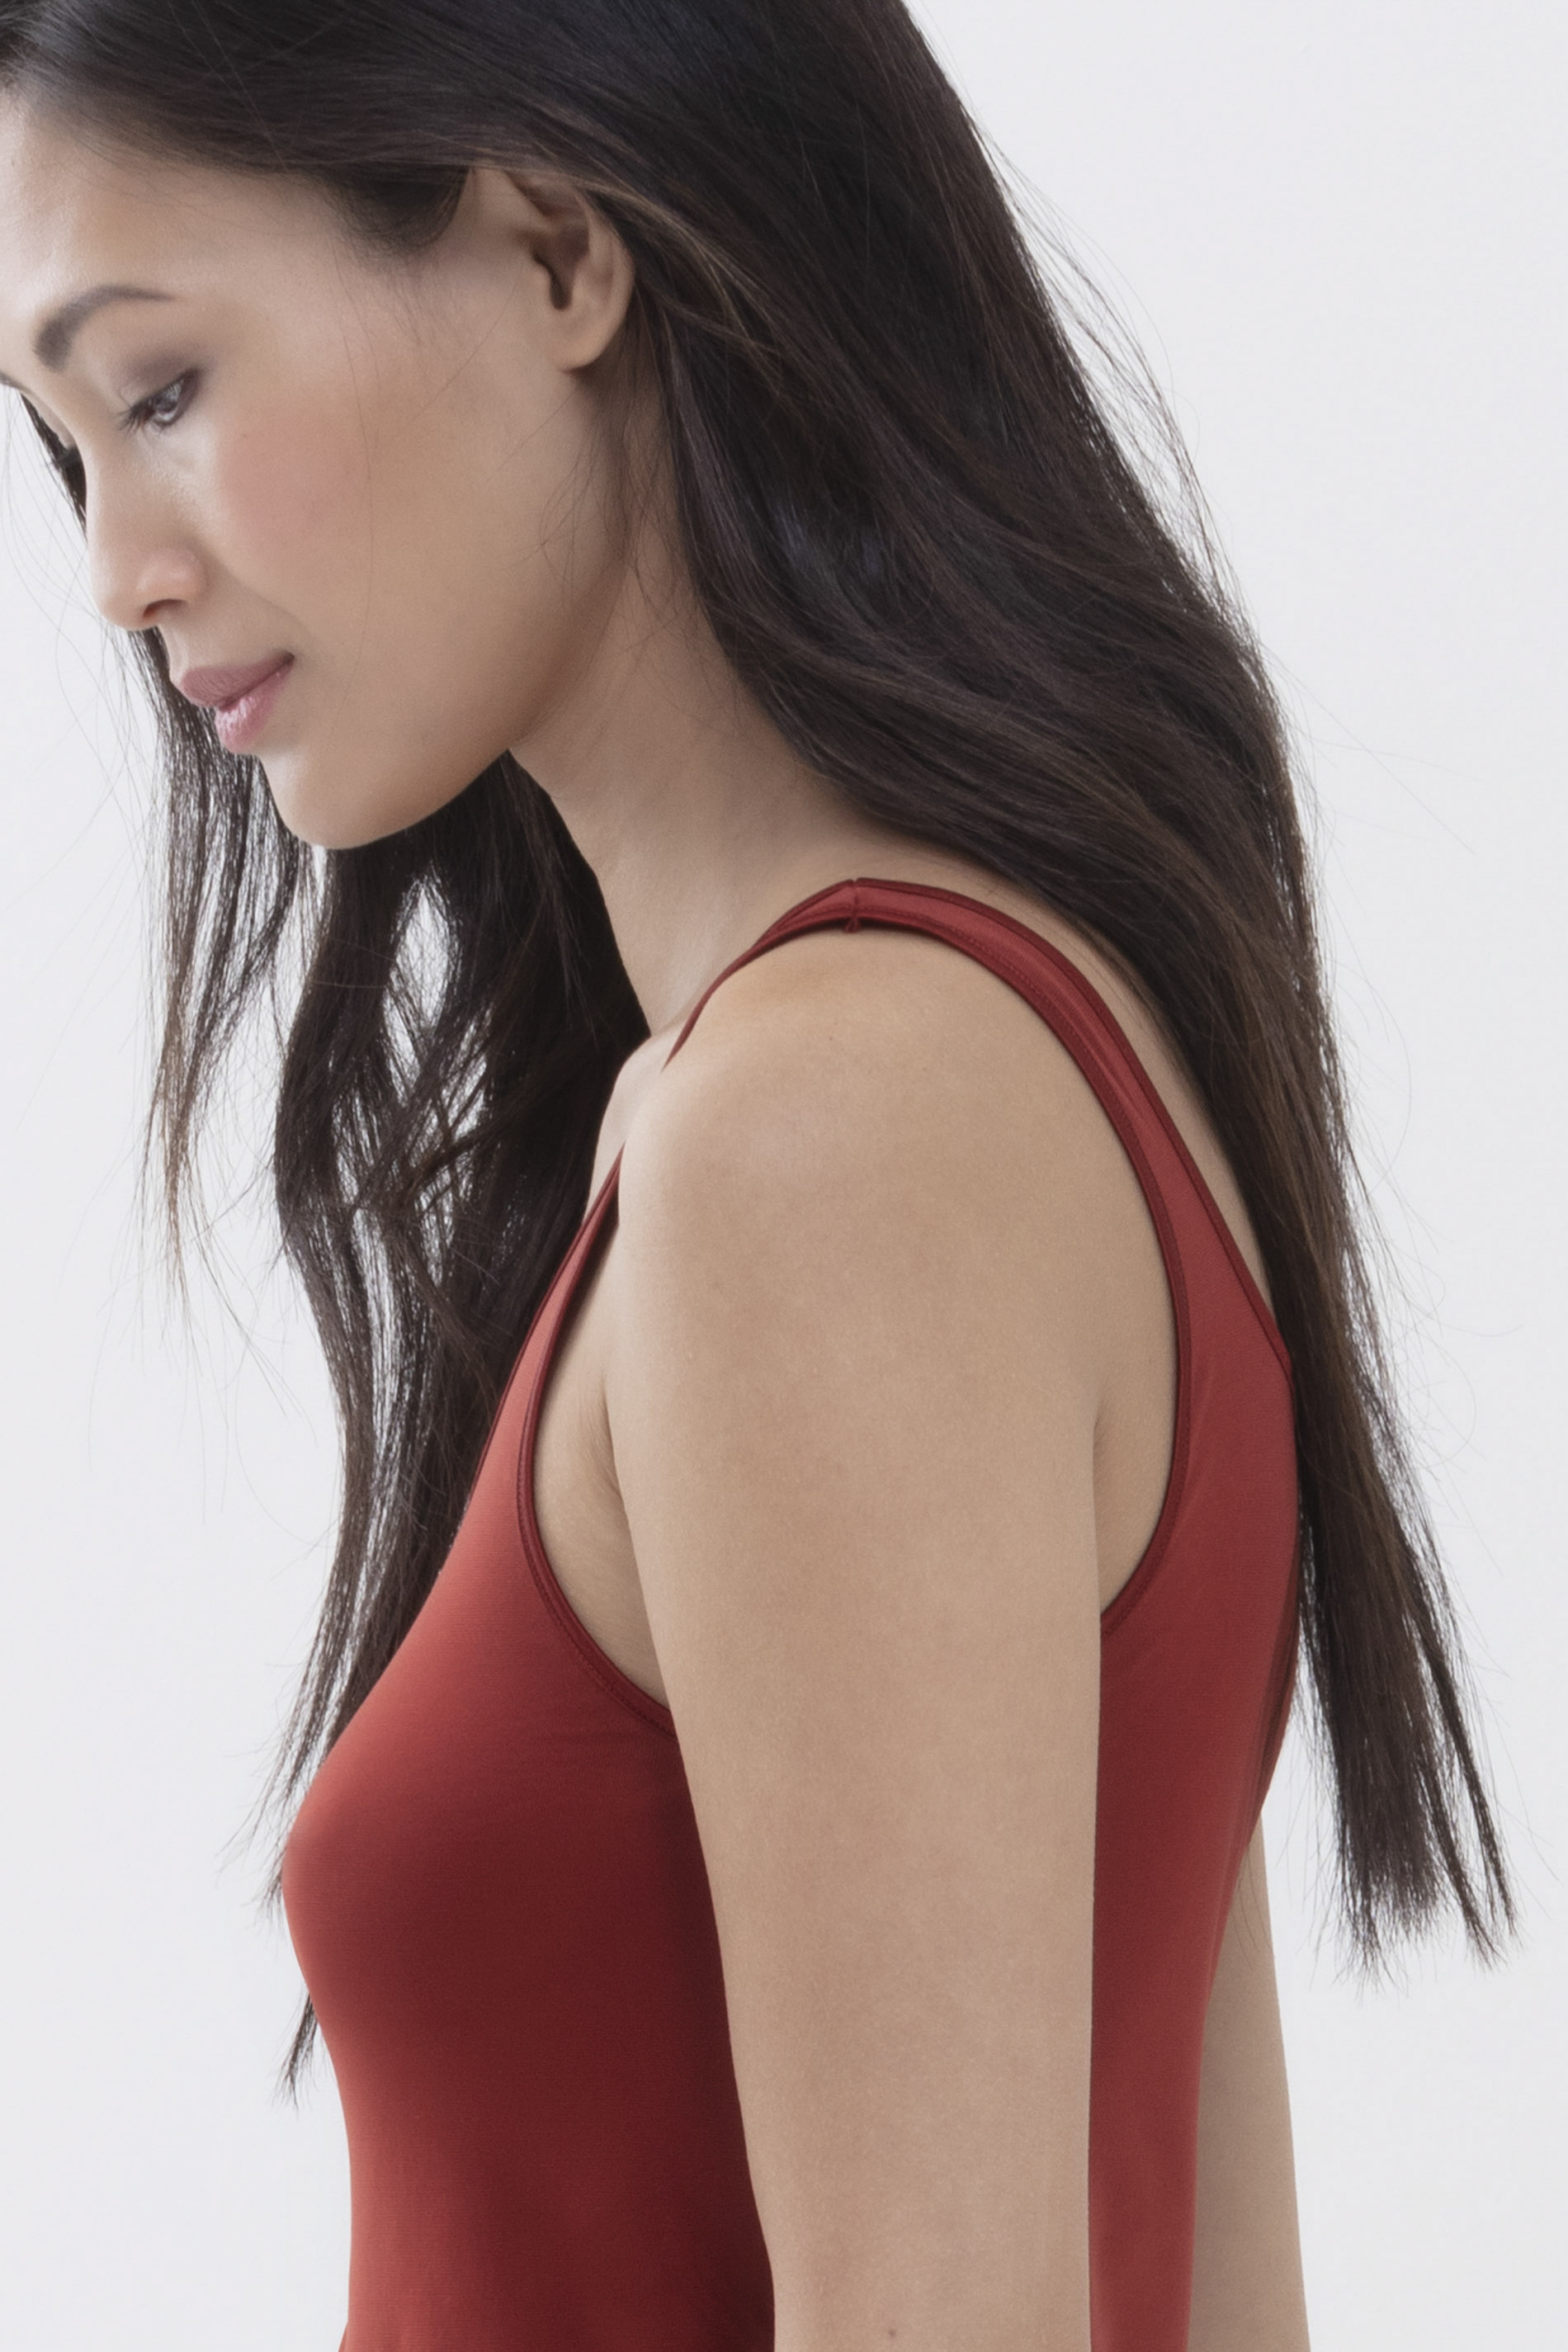 Camisole in white Red Pepper Serie Emotion Detail View 02 | mey®